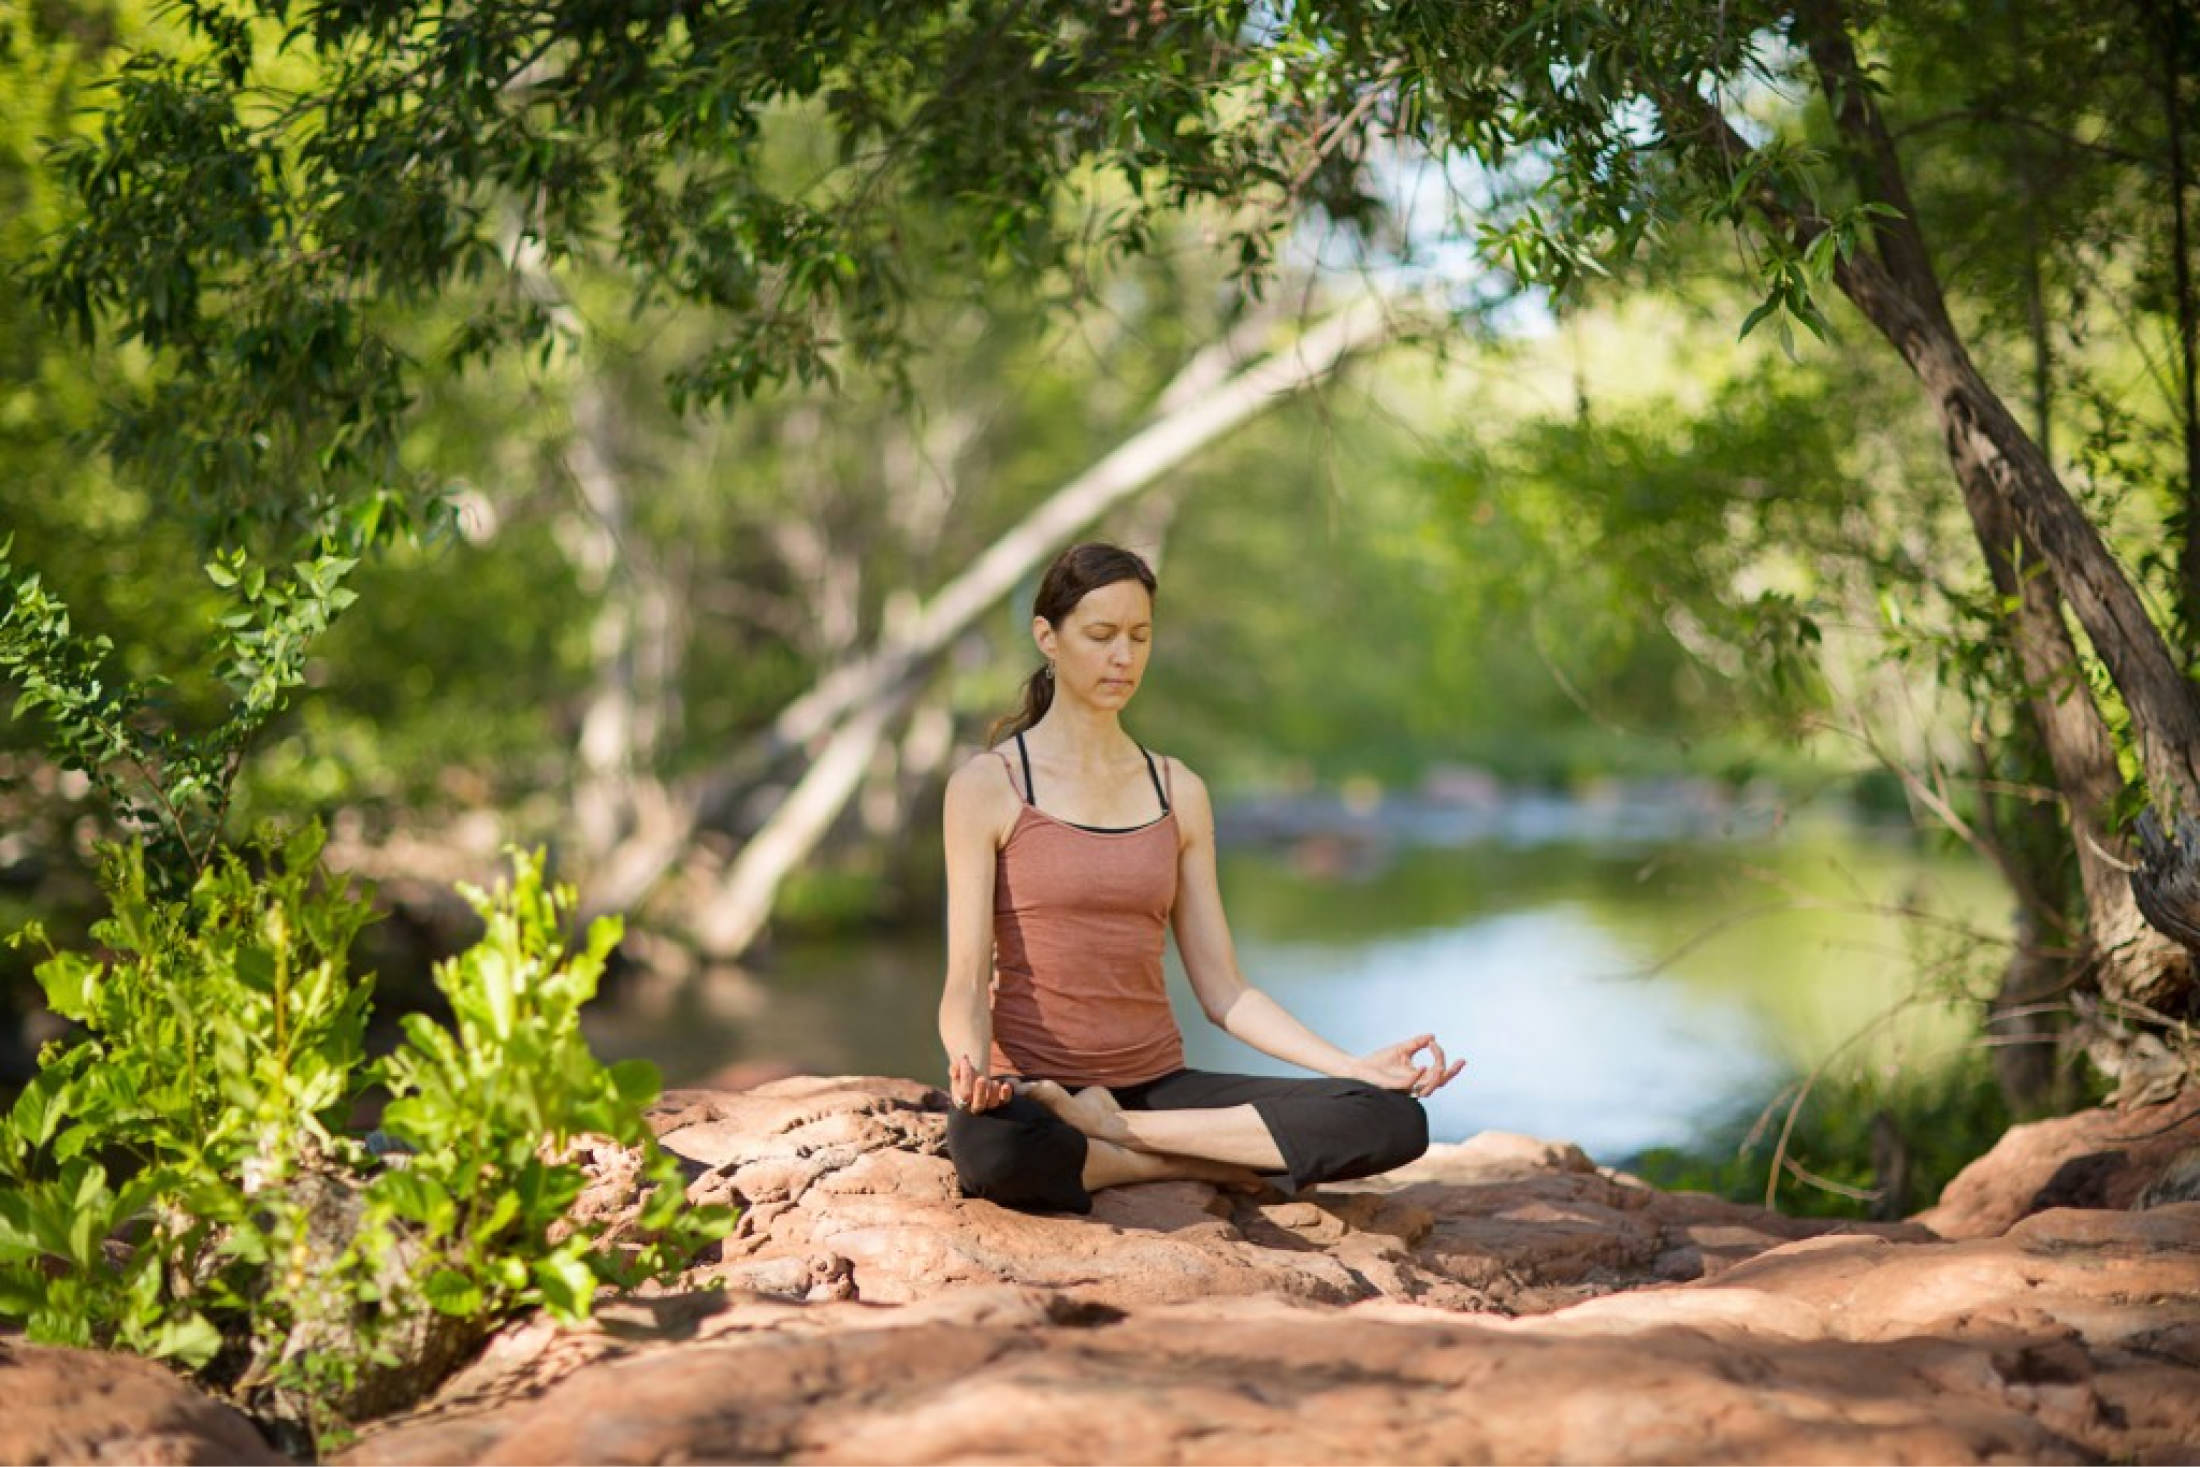 A woman meditating next to a river in the forest